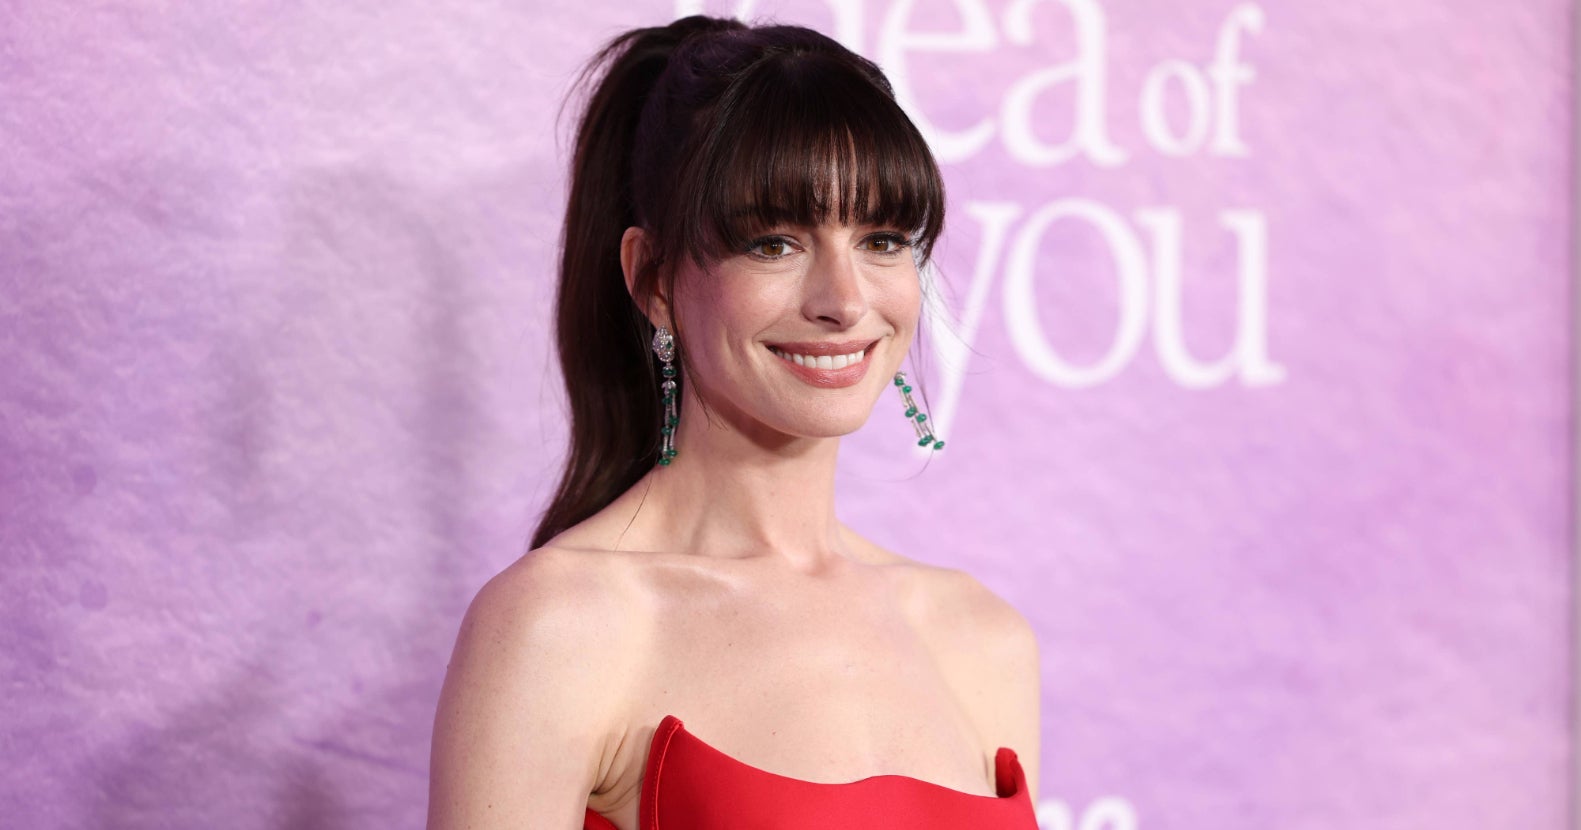 Anne Hathaway Wore A Modern Twist On A Classic Romantic Red Dress To "The Idea Of You" Premiere